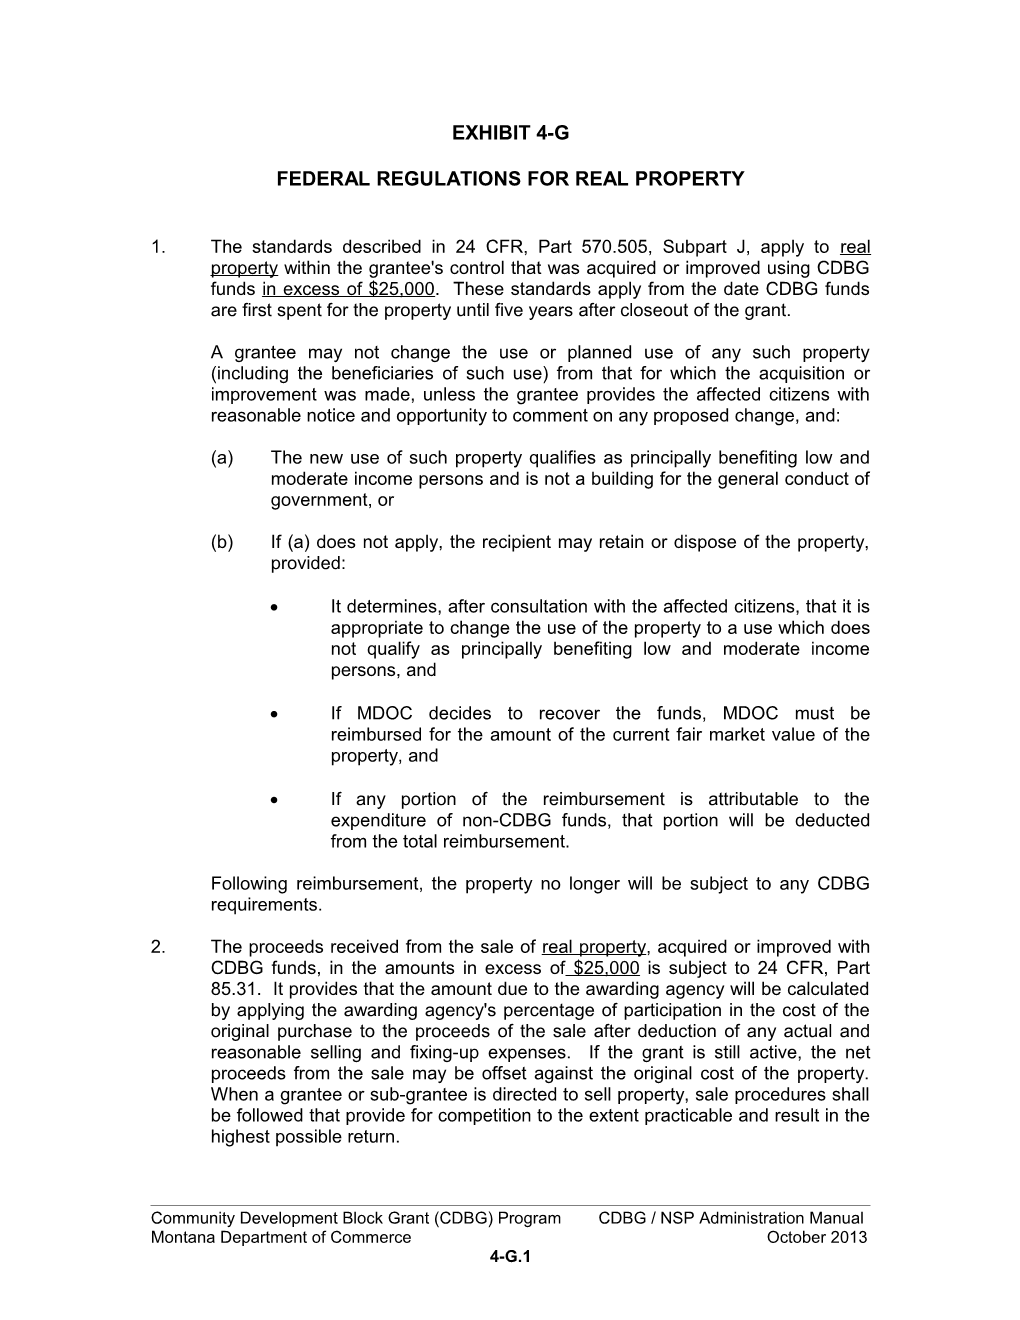 Federal Regulations for Real Property